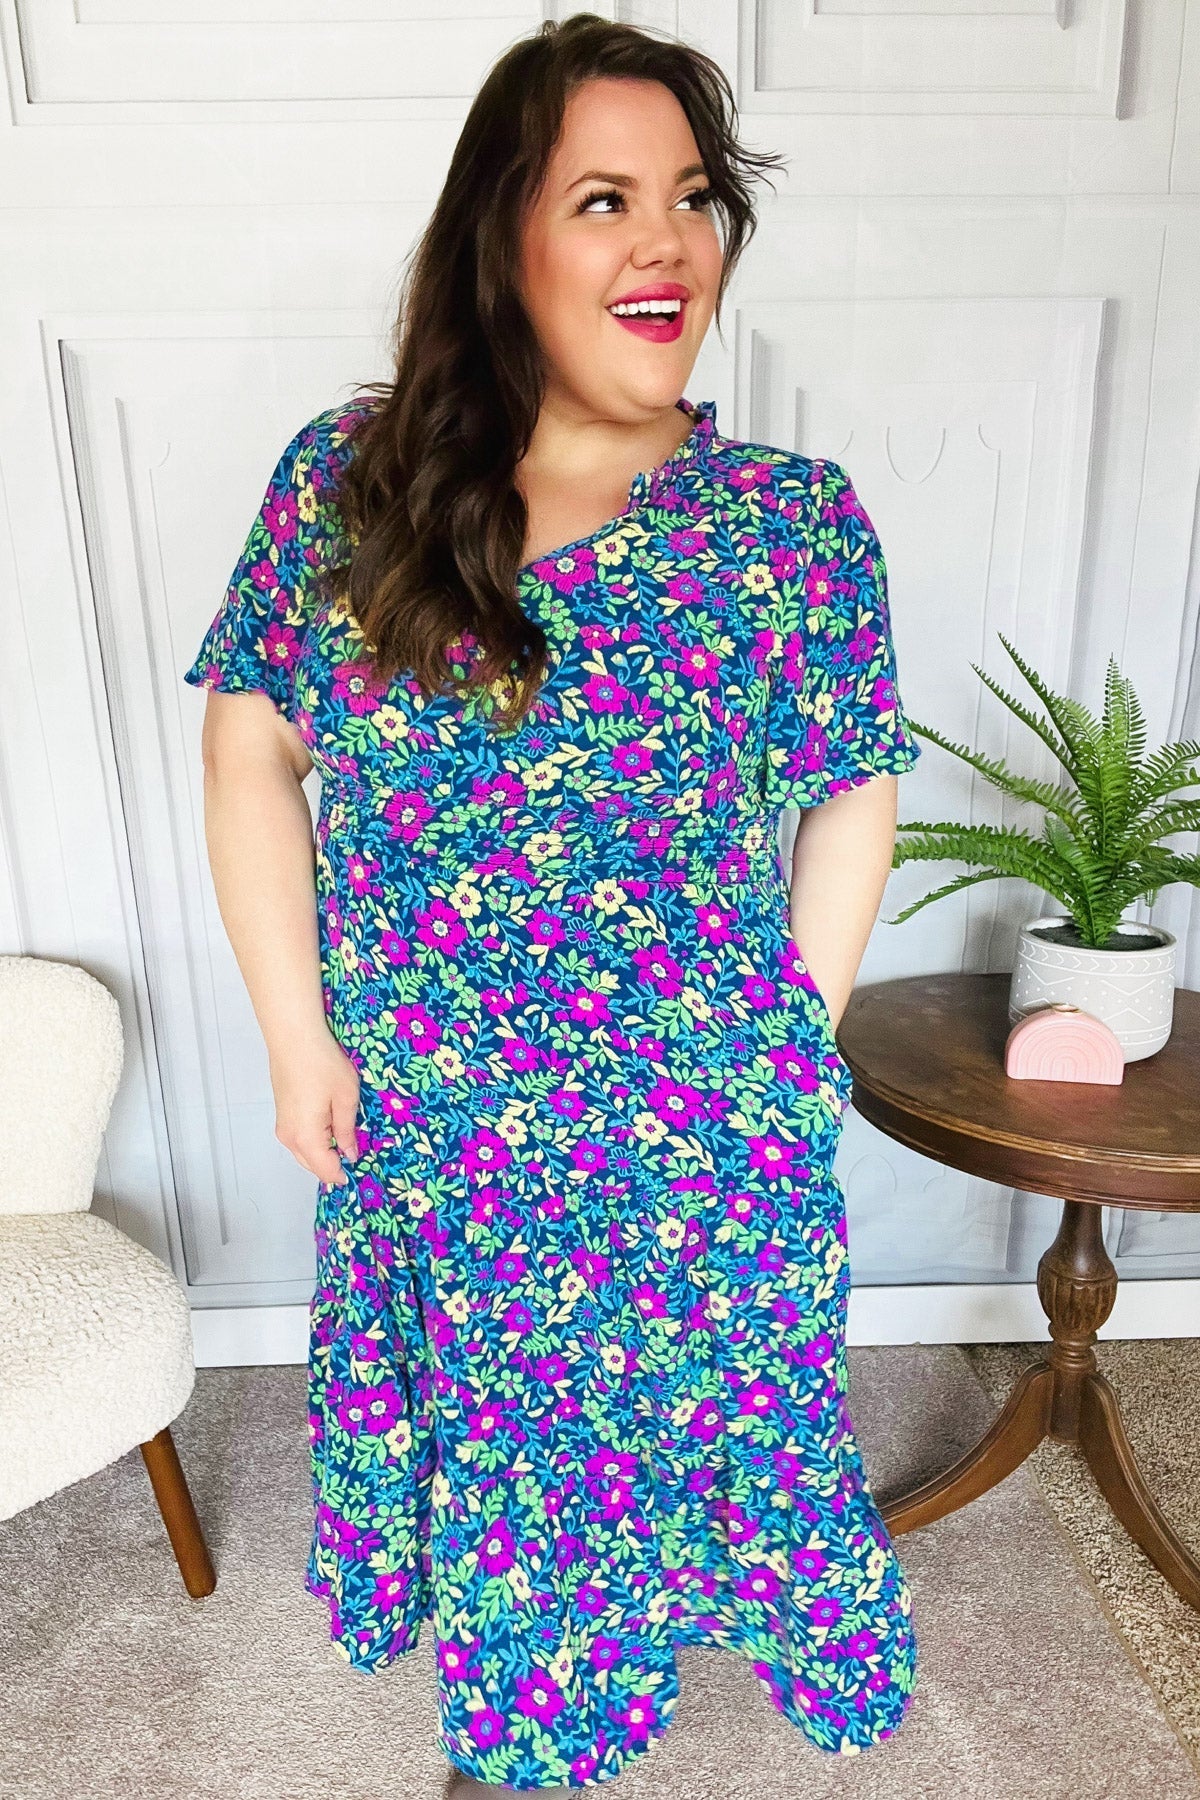 Shop Eyes On You Floral Smocked Waist Maxi Dress-Dresses at Ruby Joy Boutique, a Women's Clothing Store in Pickerington, Ohio